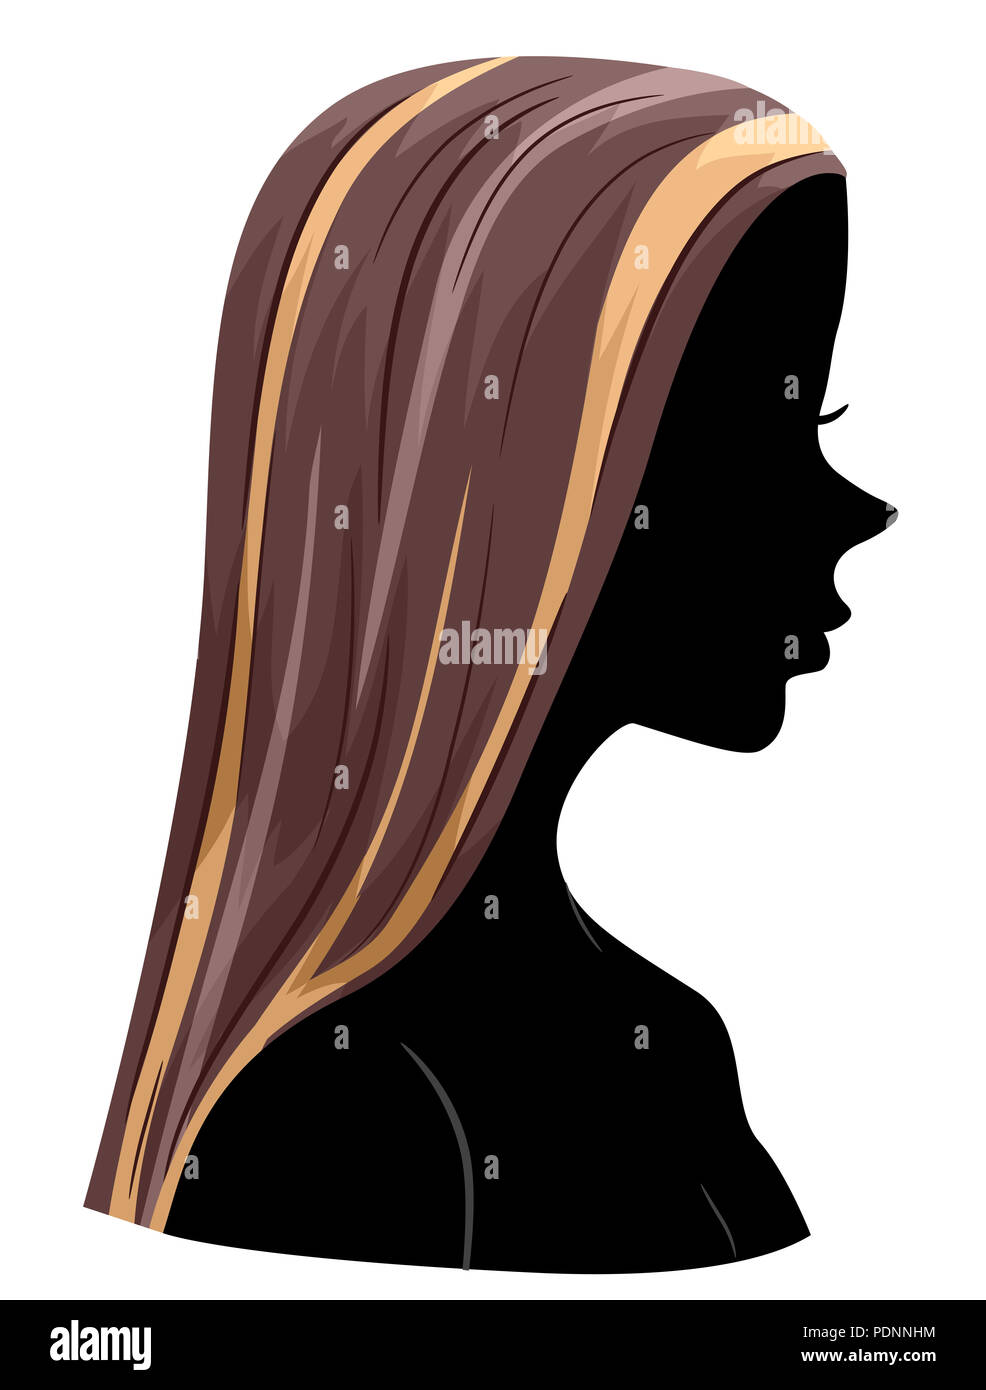 Illustration of a Girl Silhouette Showing Hair Highlights Stock Photo -  Alamy